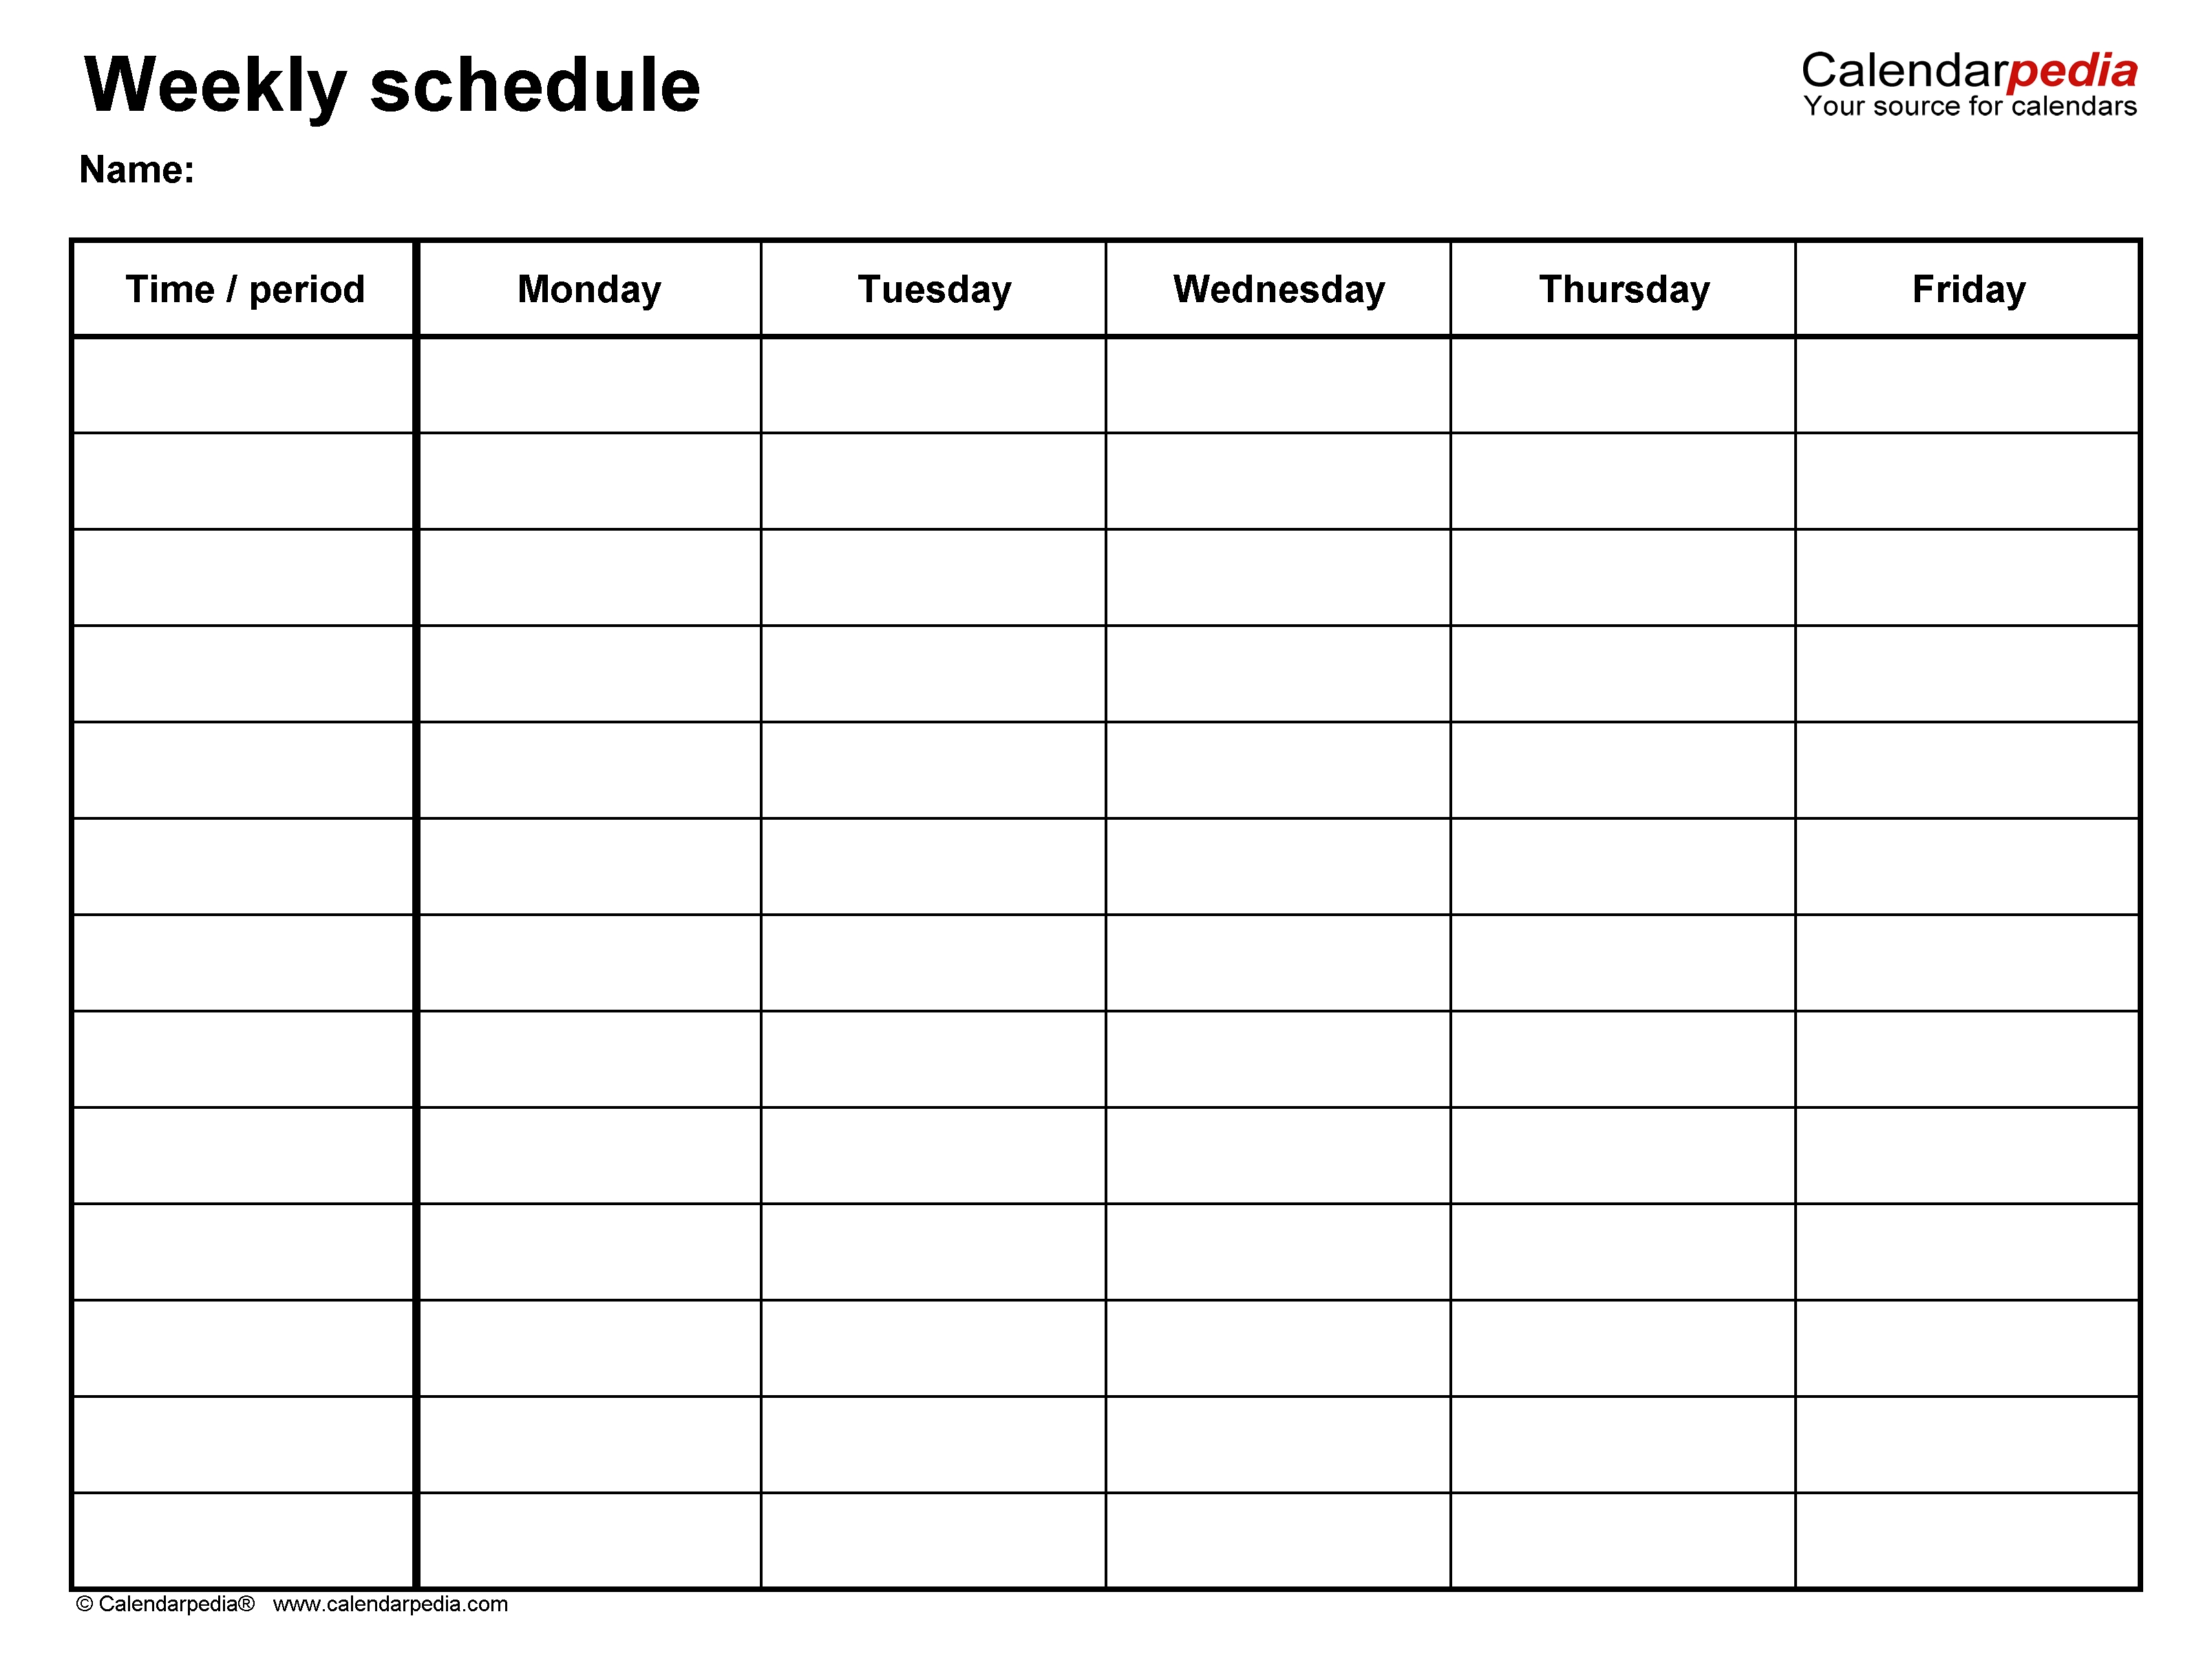 Free Weekly Schedule Templates For Word - 18 Templates-Monday To Friday Timetable Template